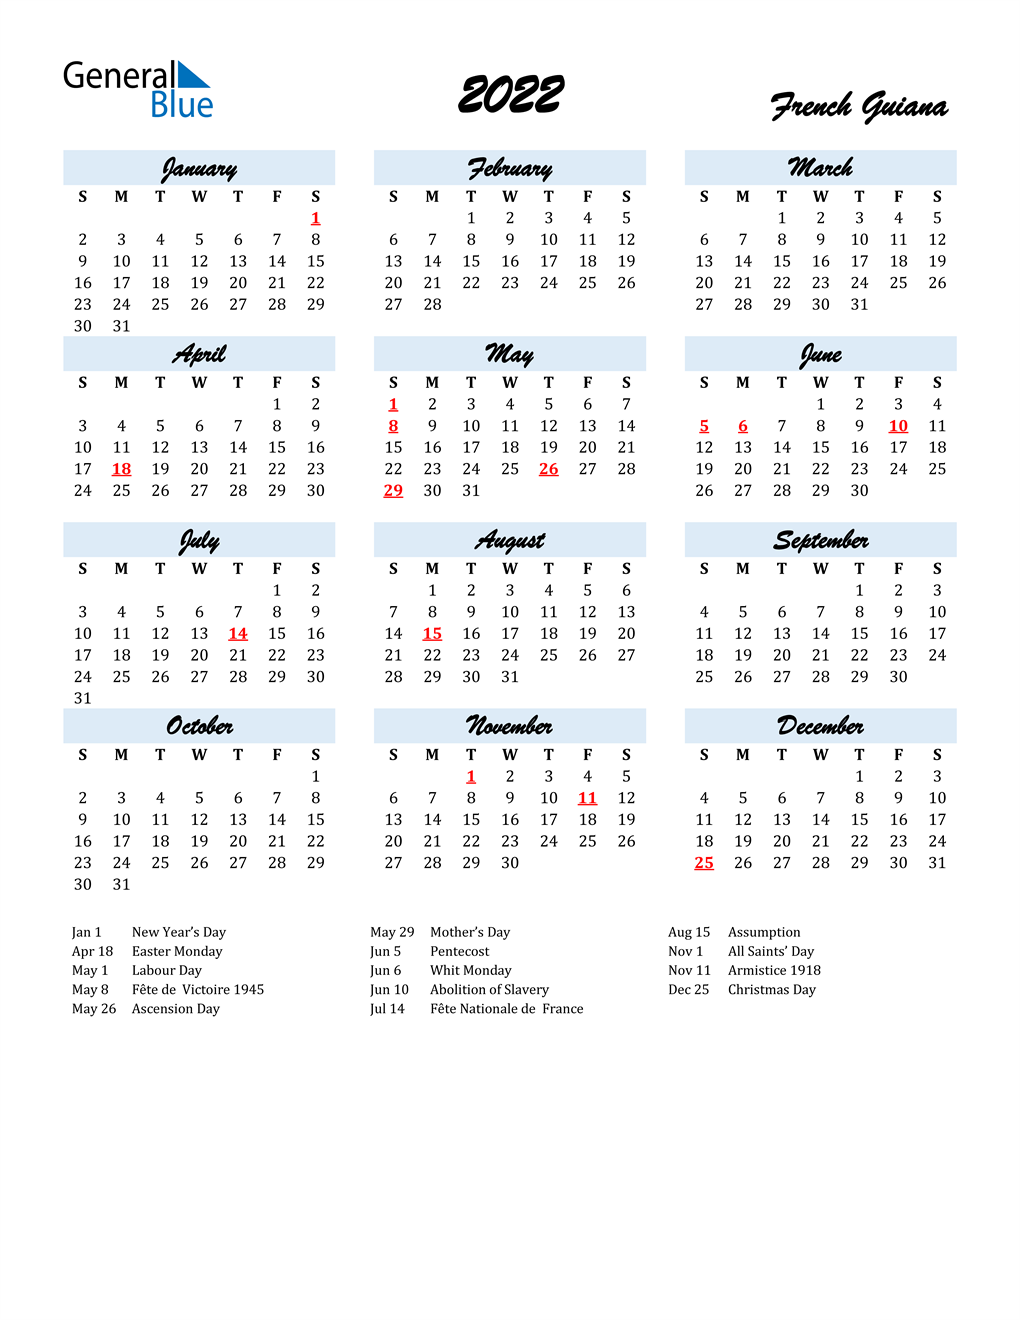 2022 French Guiana Calendar With Holidays